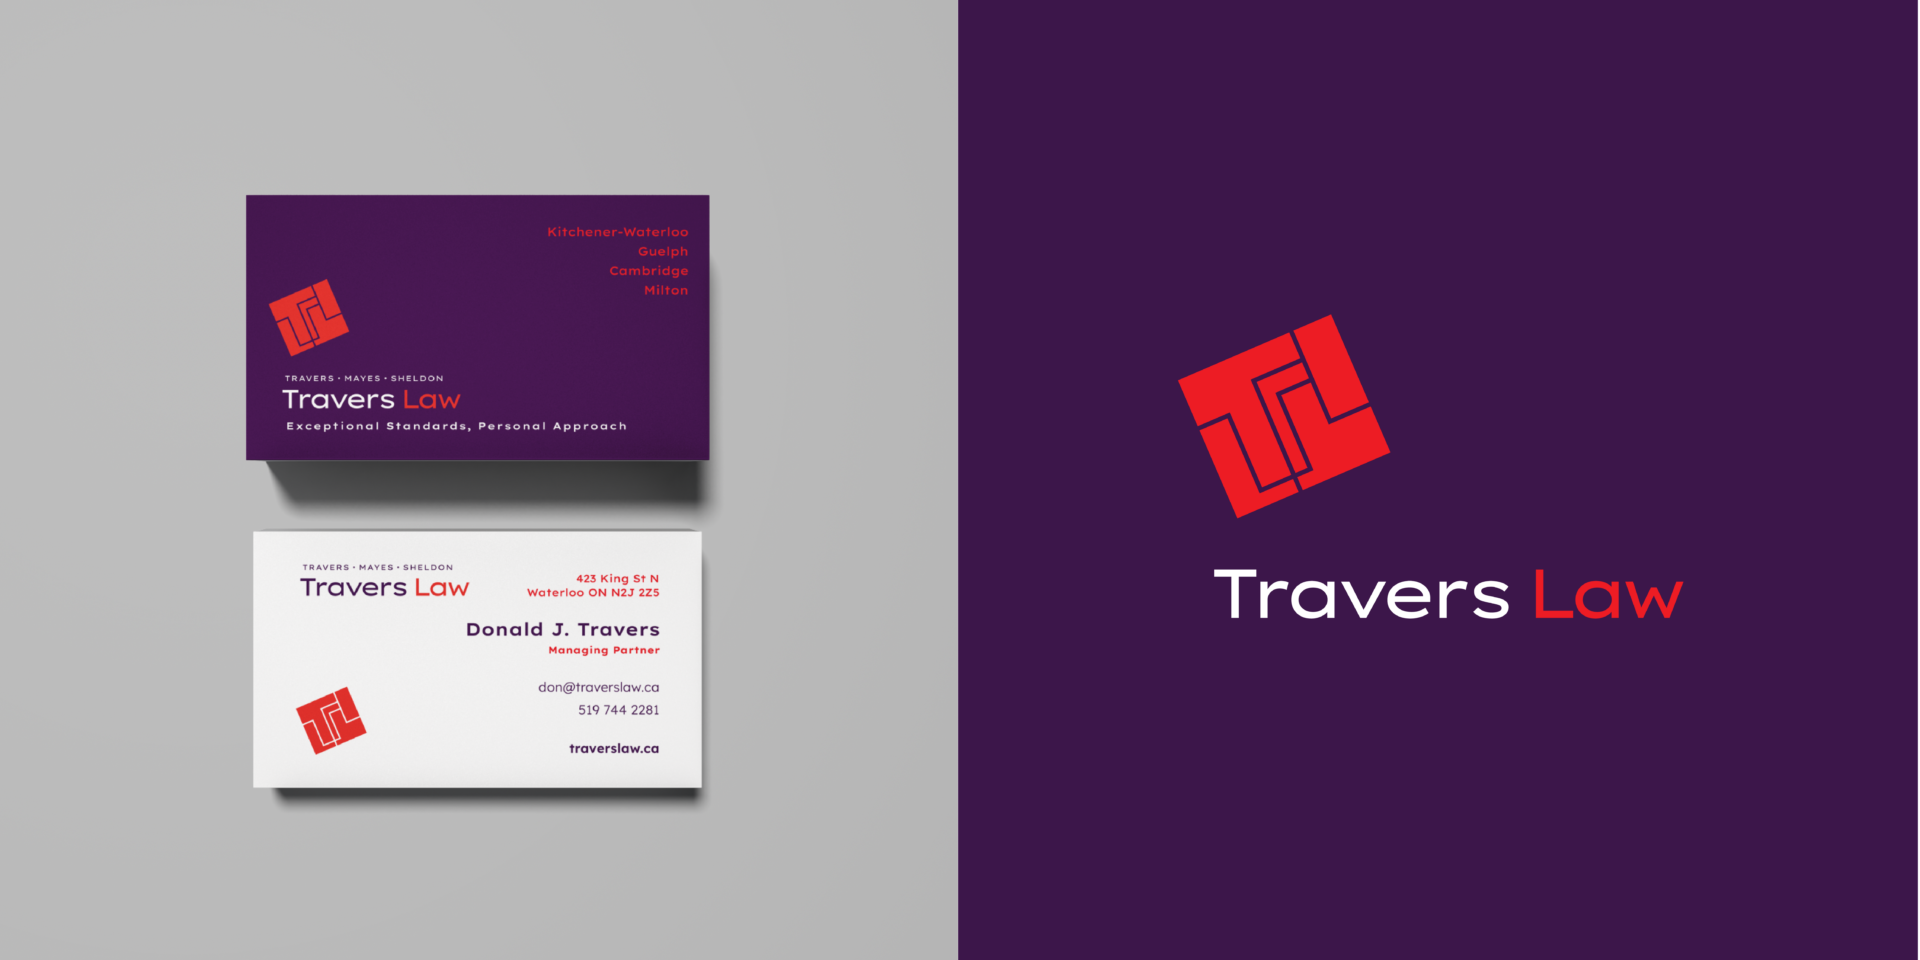 Business card design for Travers Law firm rebrand